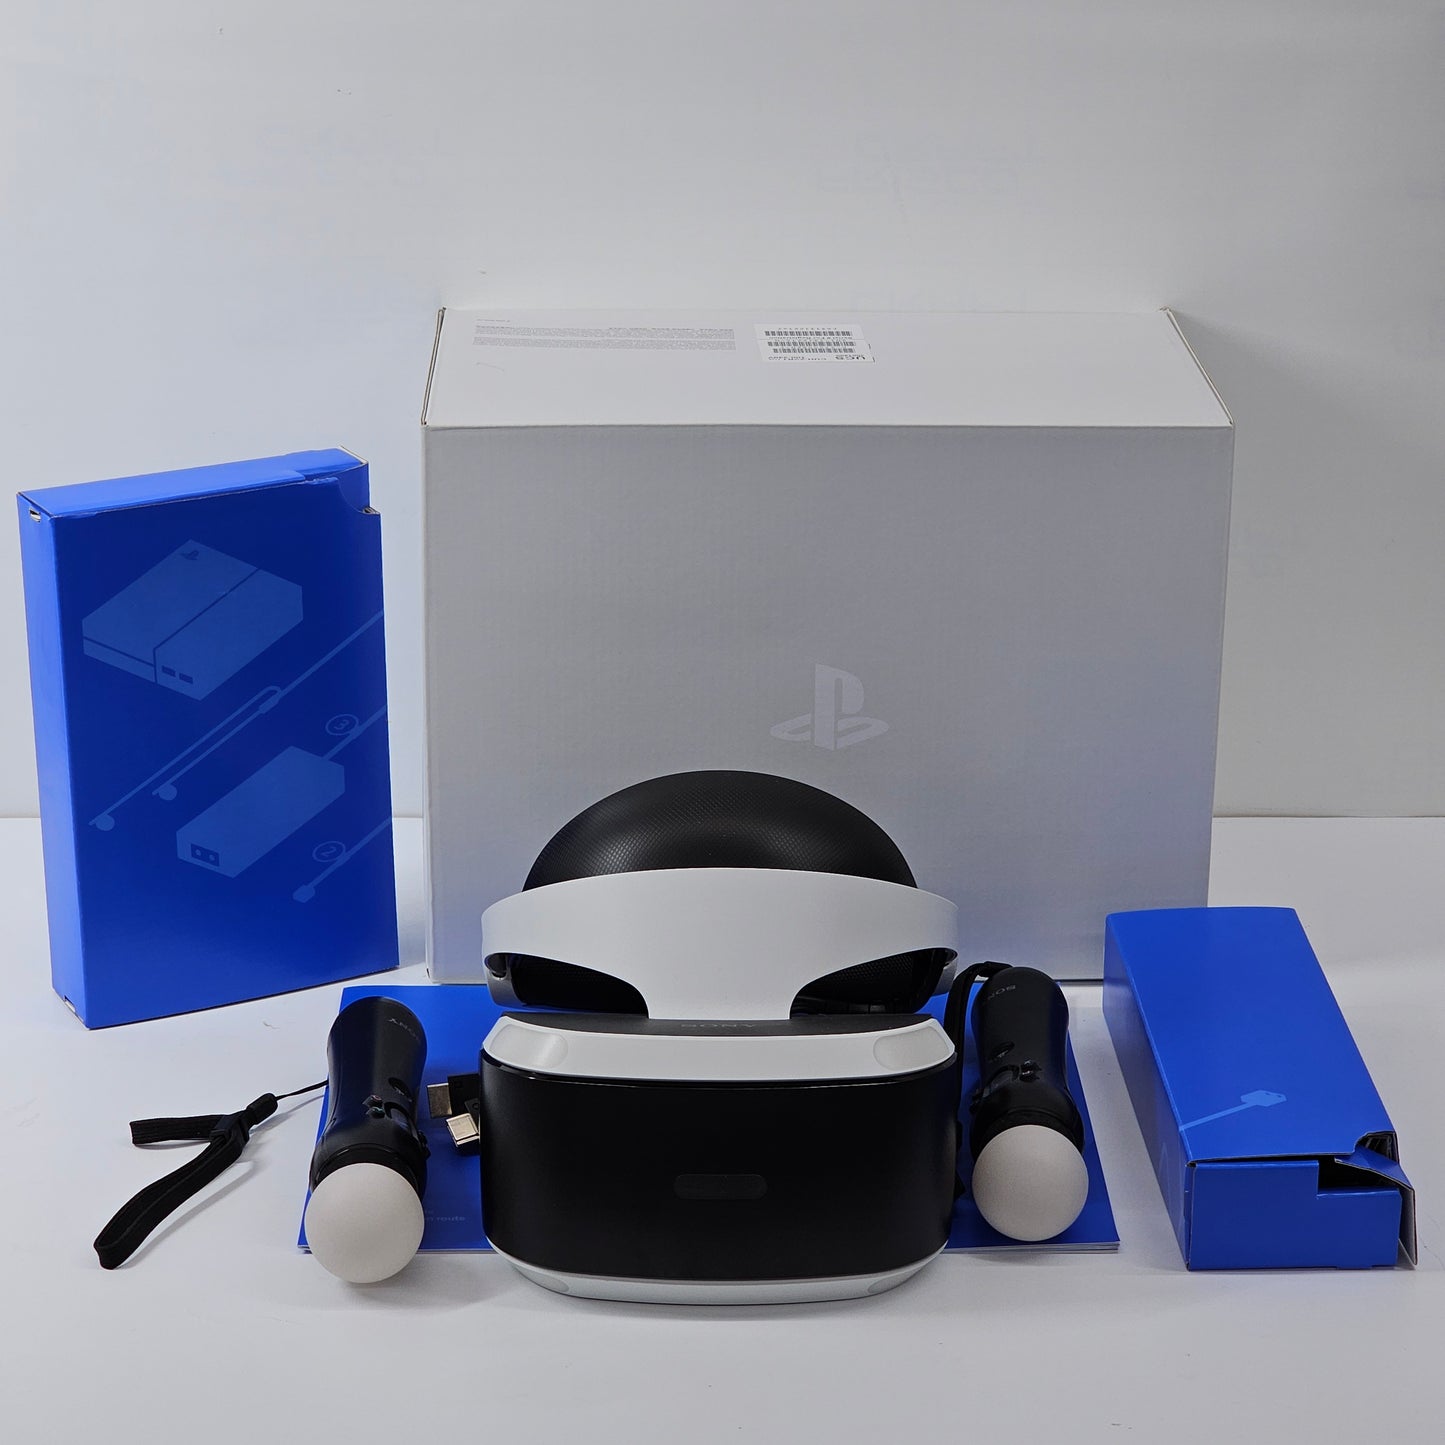 Sony PlayStation VR Virtual Reality Headset CUH-ZVR1